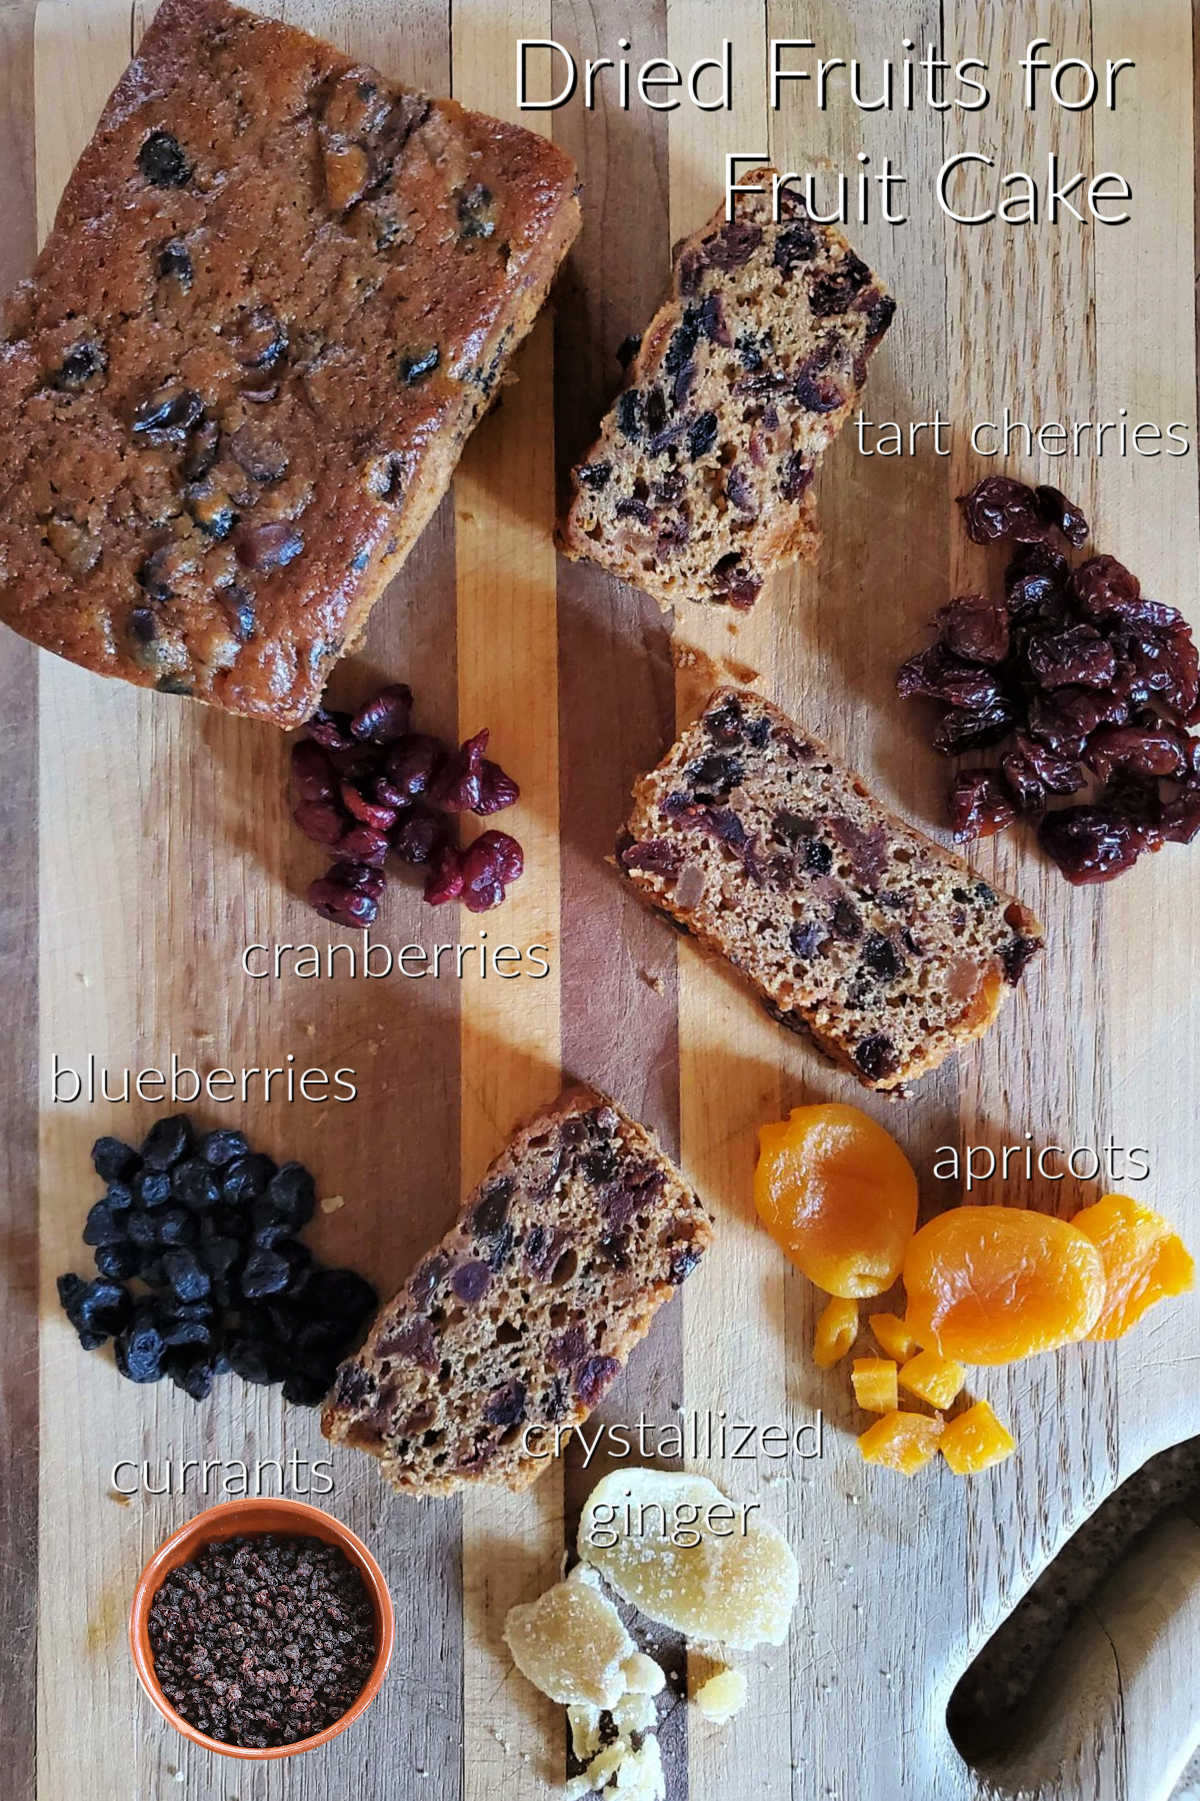 Collage of free range fruit cake and the dried fruit ingredients needed to make it.